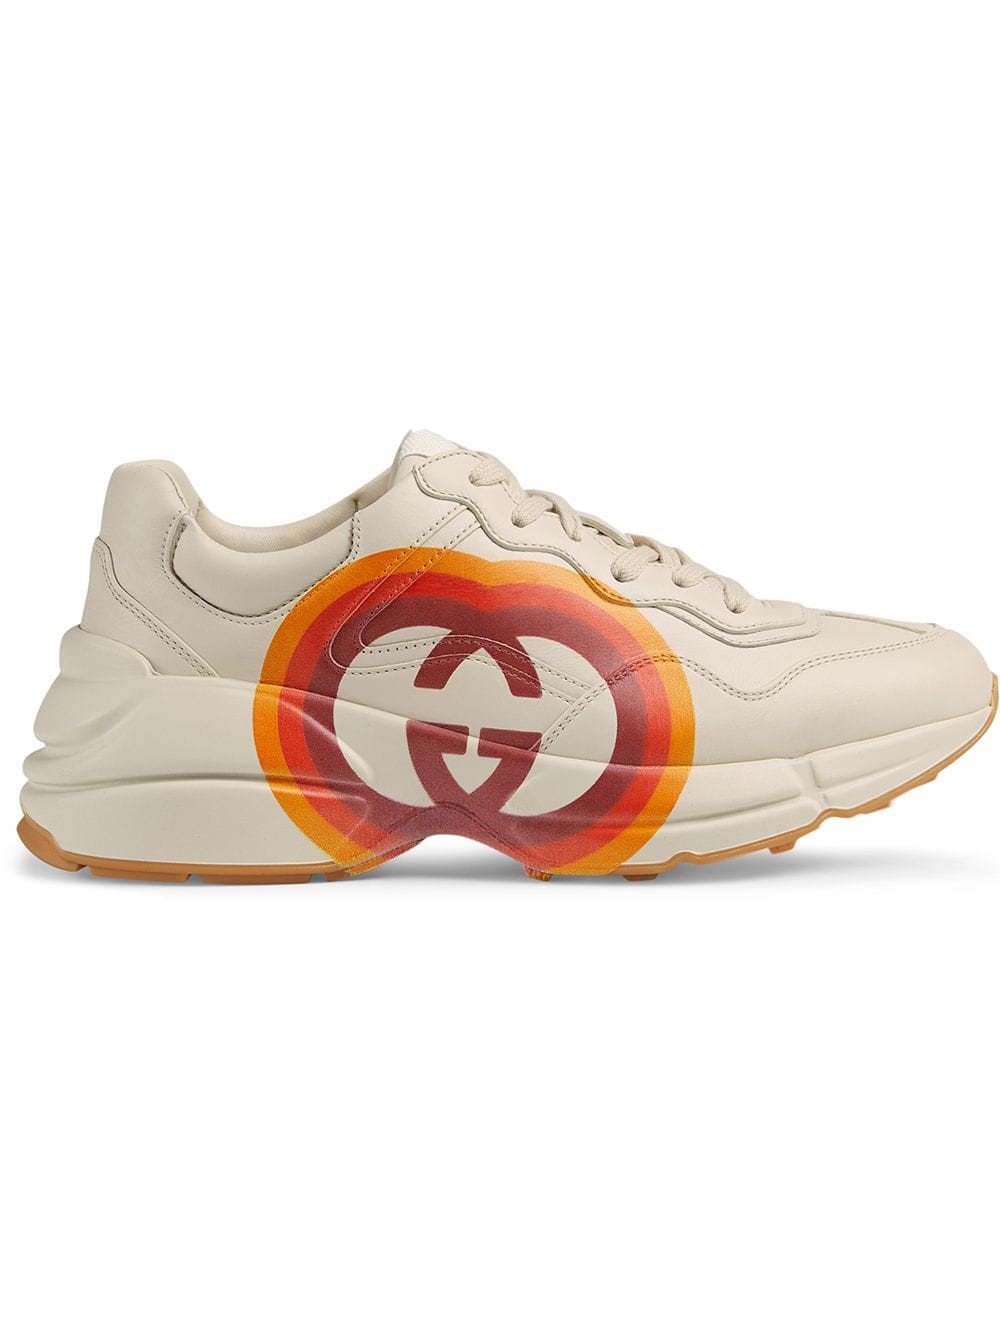 gucci APOLLO SNEAKERS available on 